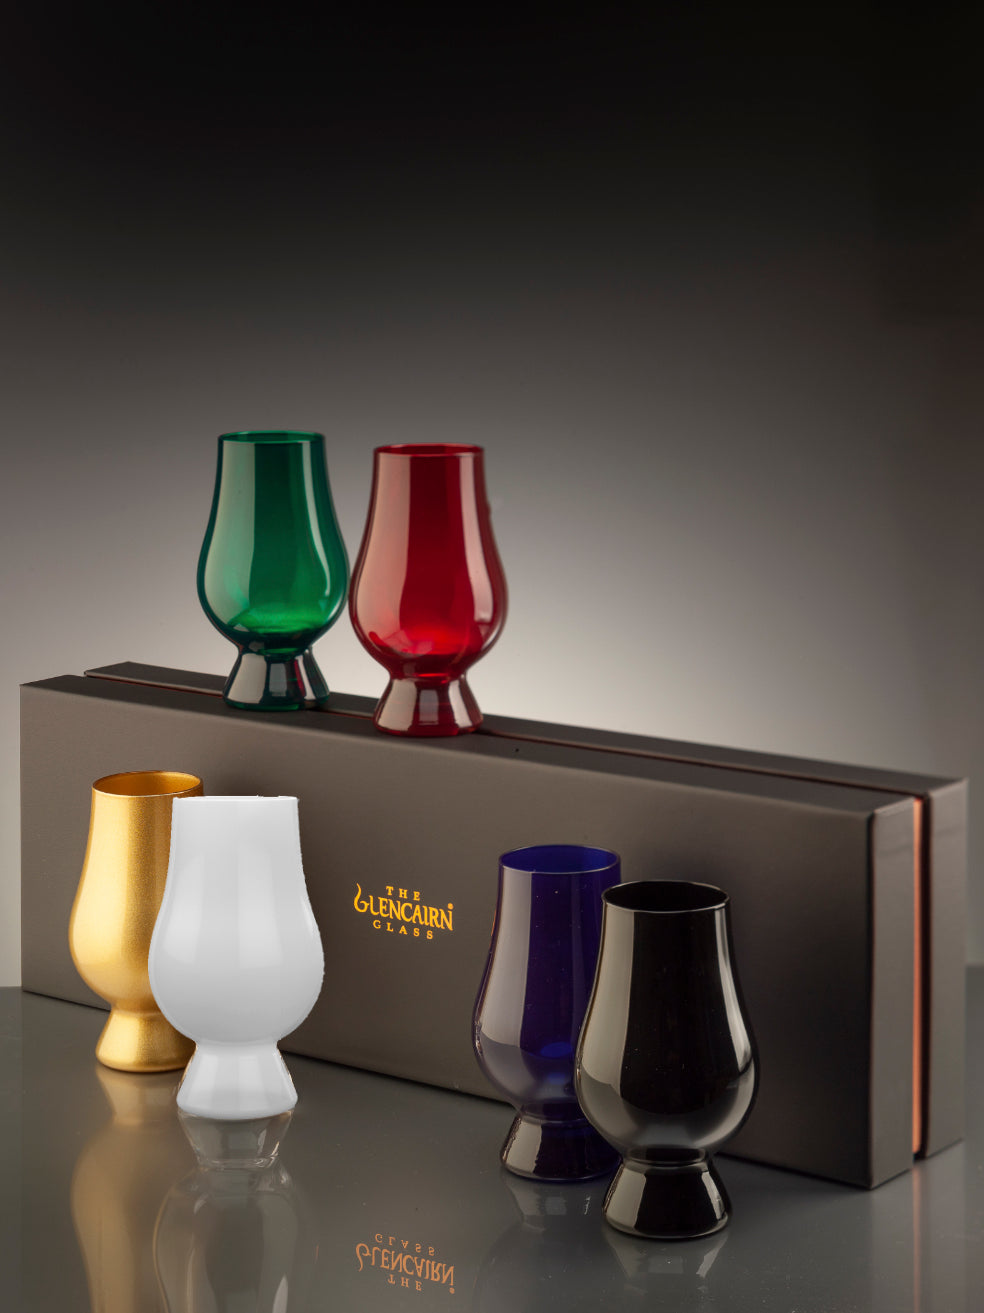  It features the world's favourite whisky glass in six different colours: black, blue, green, gold, red, and white.  Supplied in a luxury black gift box.